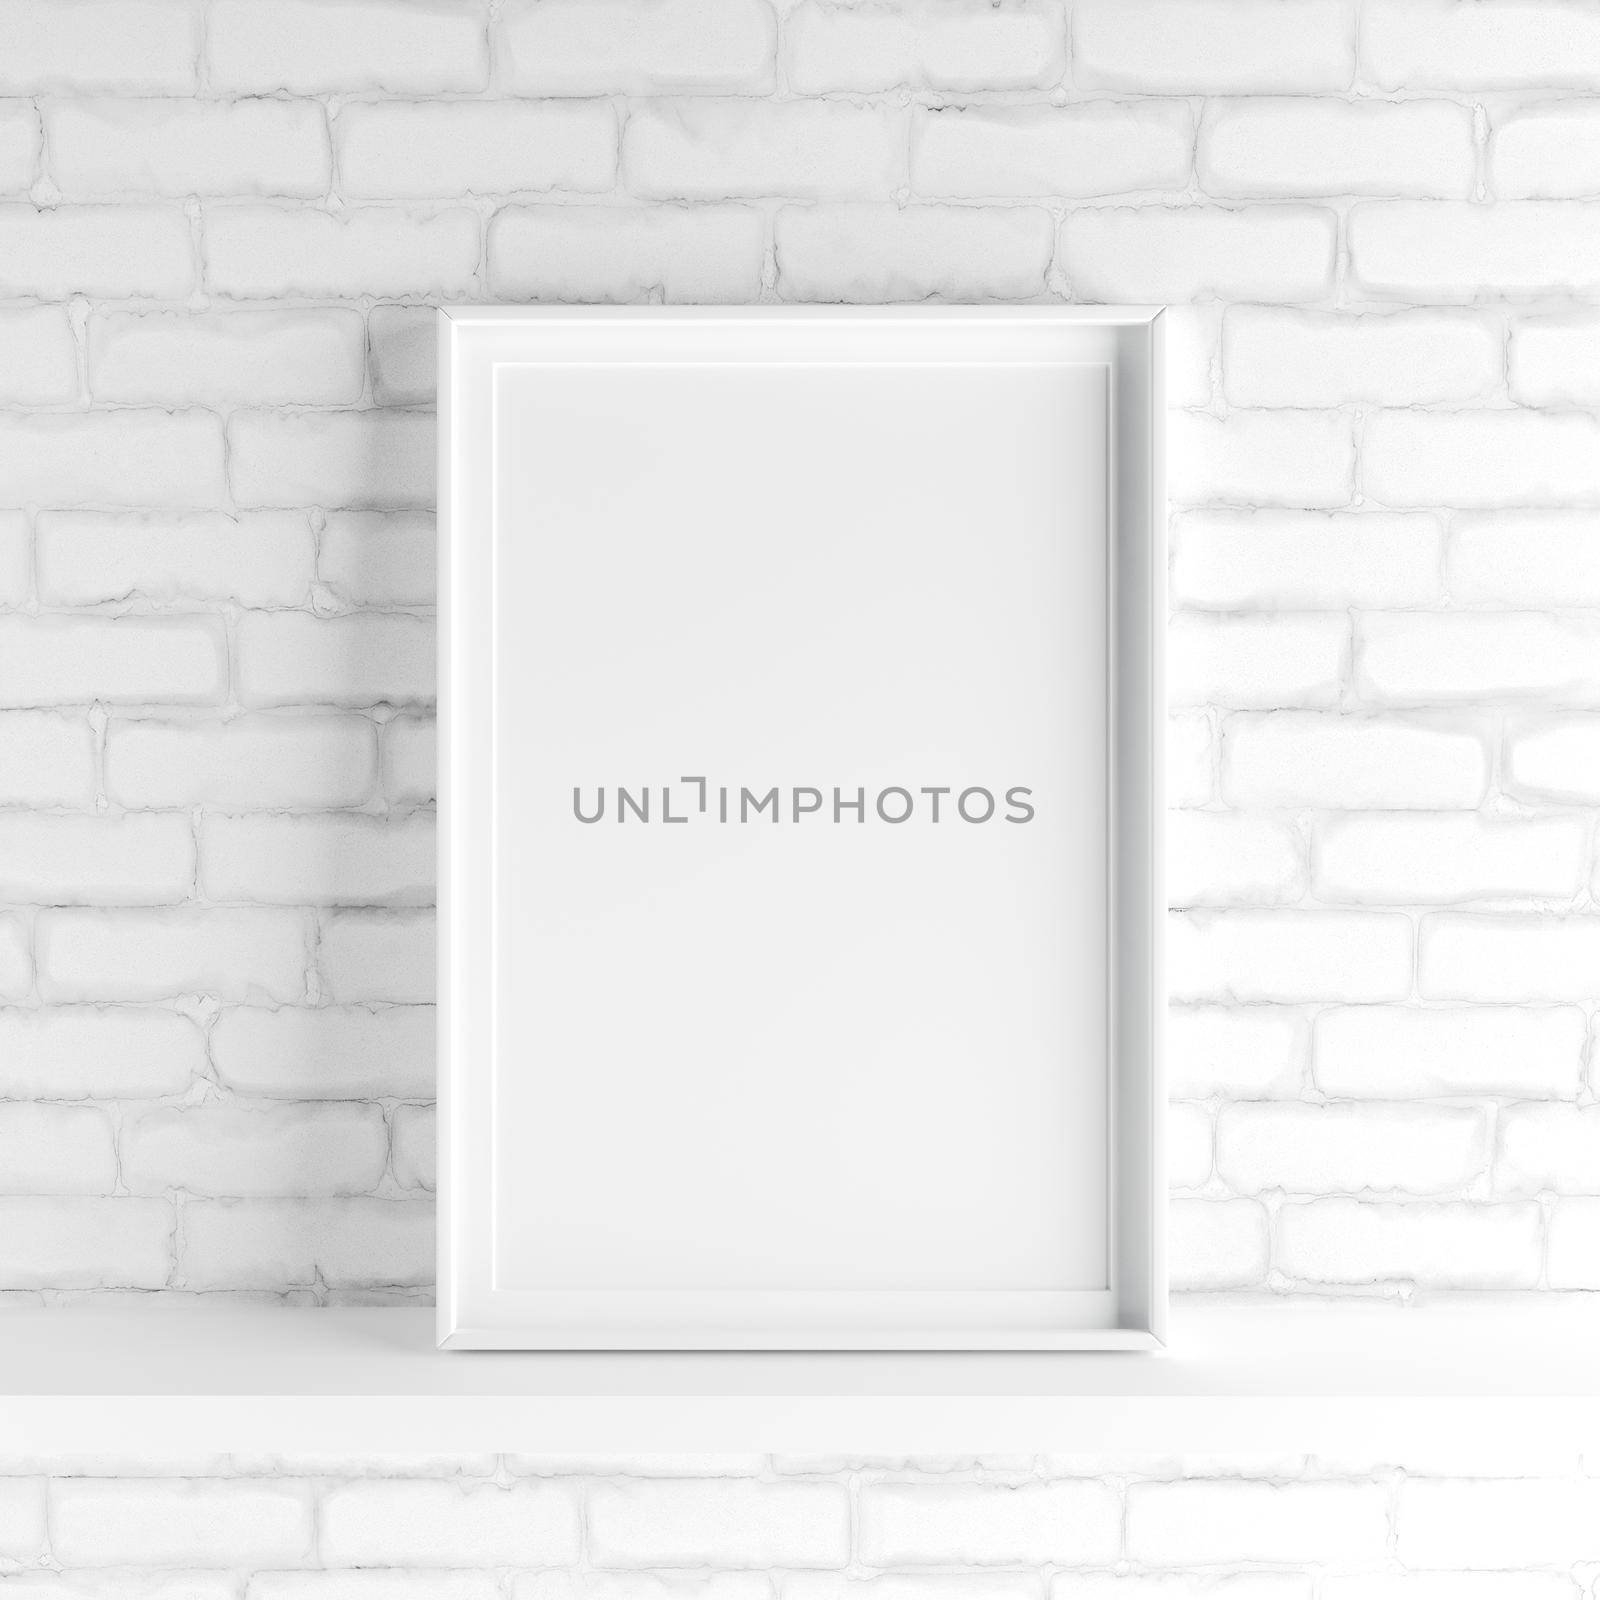 Minimalistic portrait picture frame standing on white painted brick wall by adamr